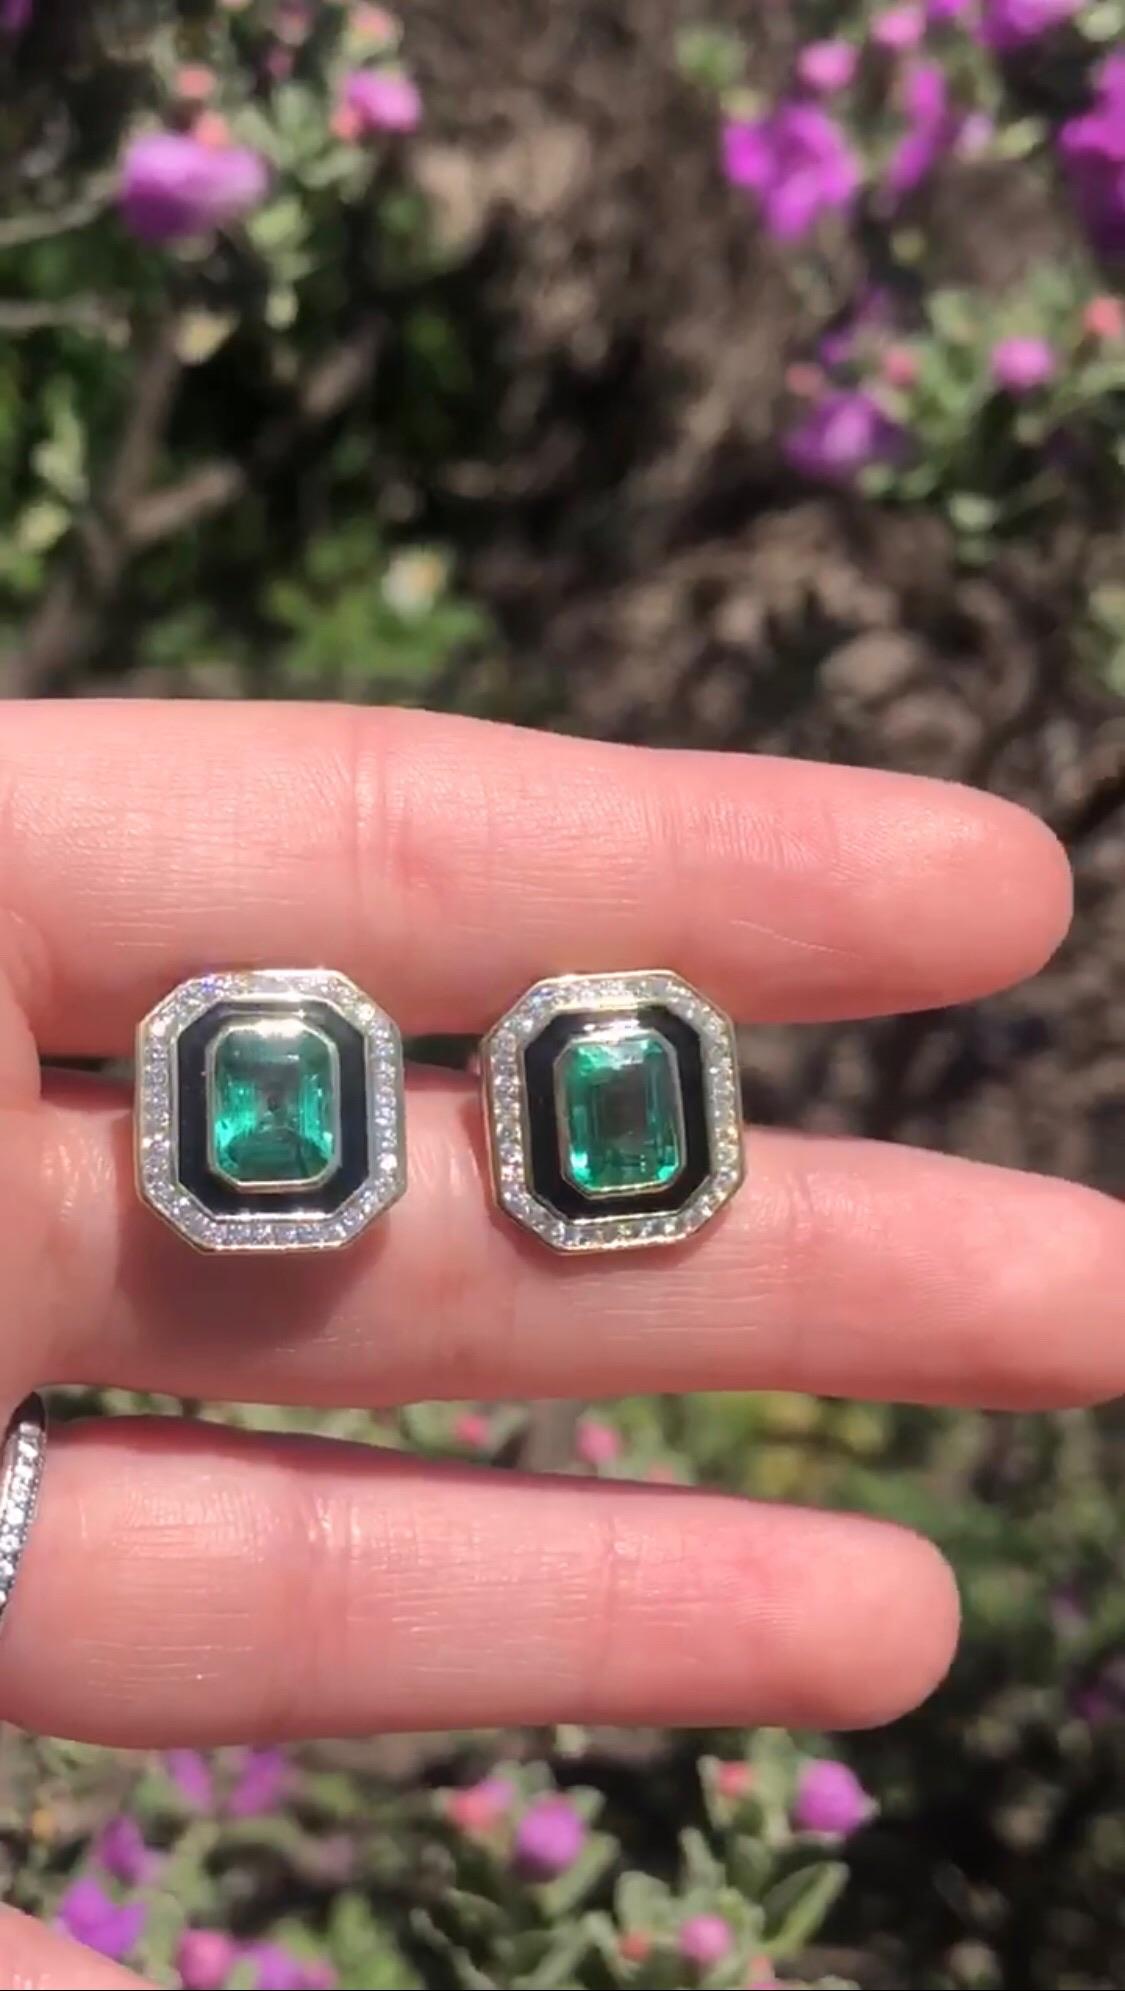 3.10 carats of vivid, bright Emerald cut Emeralds set in Black Enamel. The Emeralds and Black Enamel are surrounded by a border of .55 carats of G/H VSI Diamonds which really make them stand out on the ear. A great alternative to plain studs that